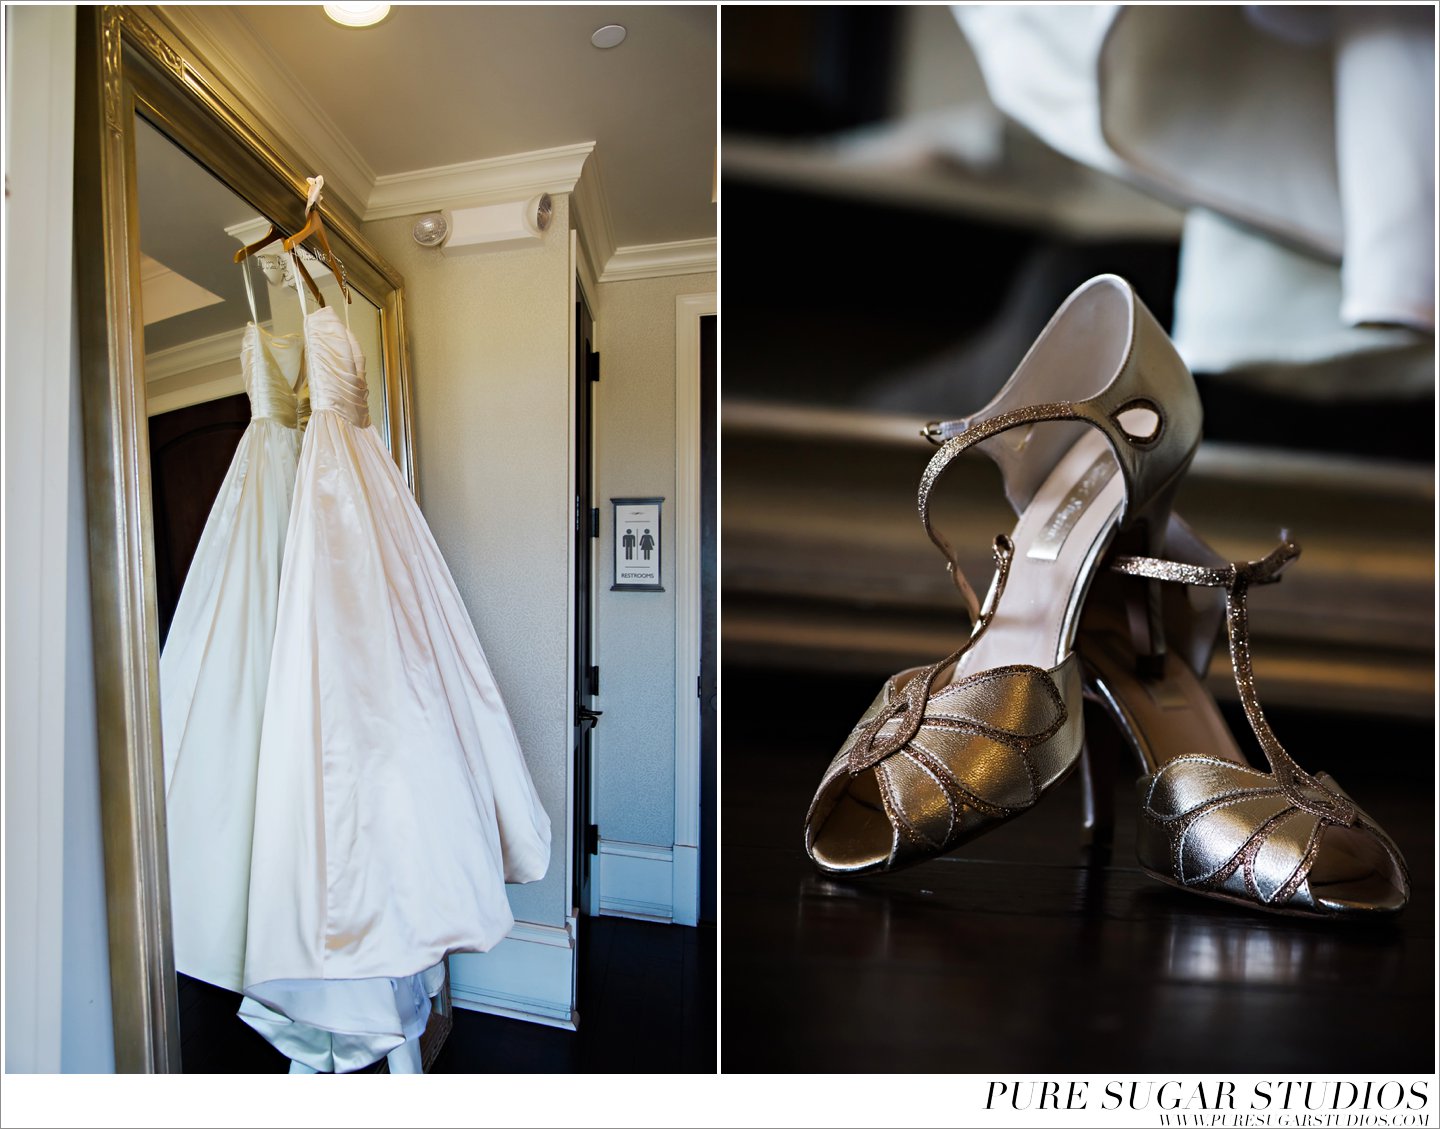 Nocatee Crosswater Hall Wedding Dress from White Magnolia gold shoes from BHLDN